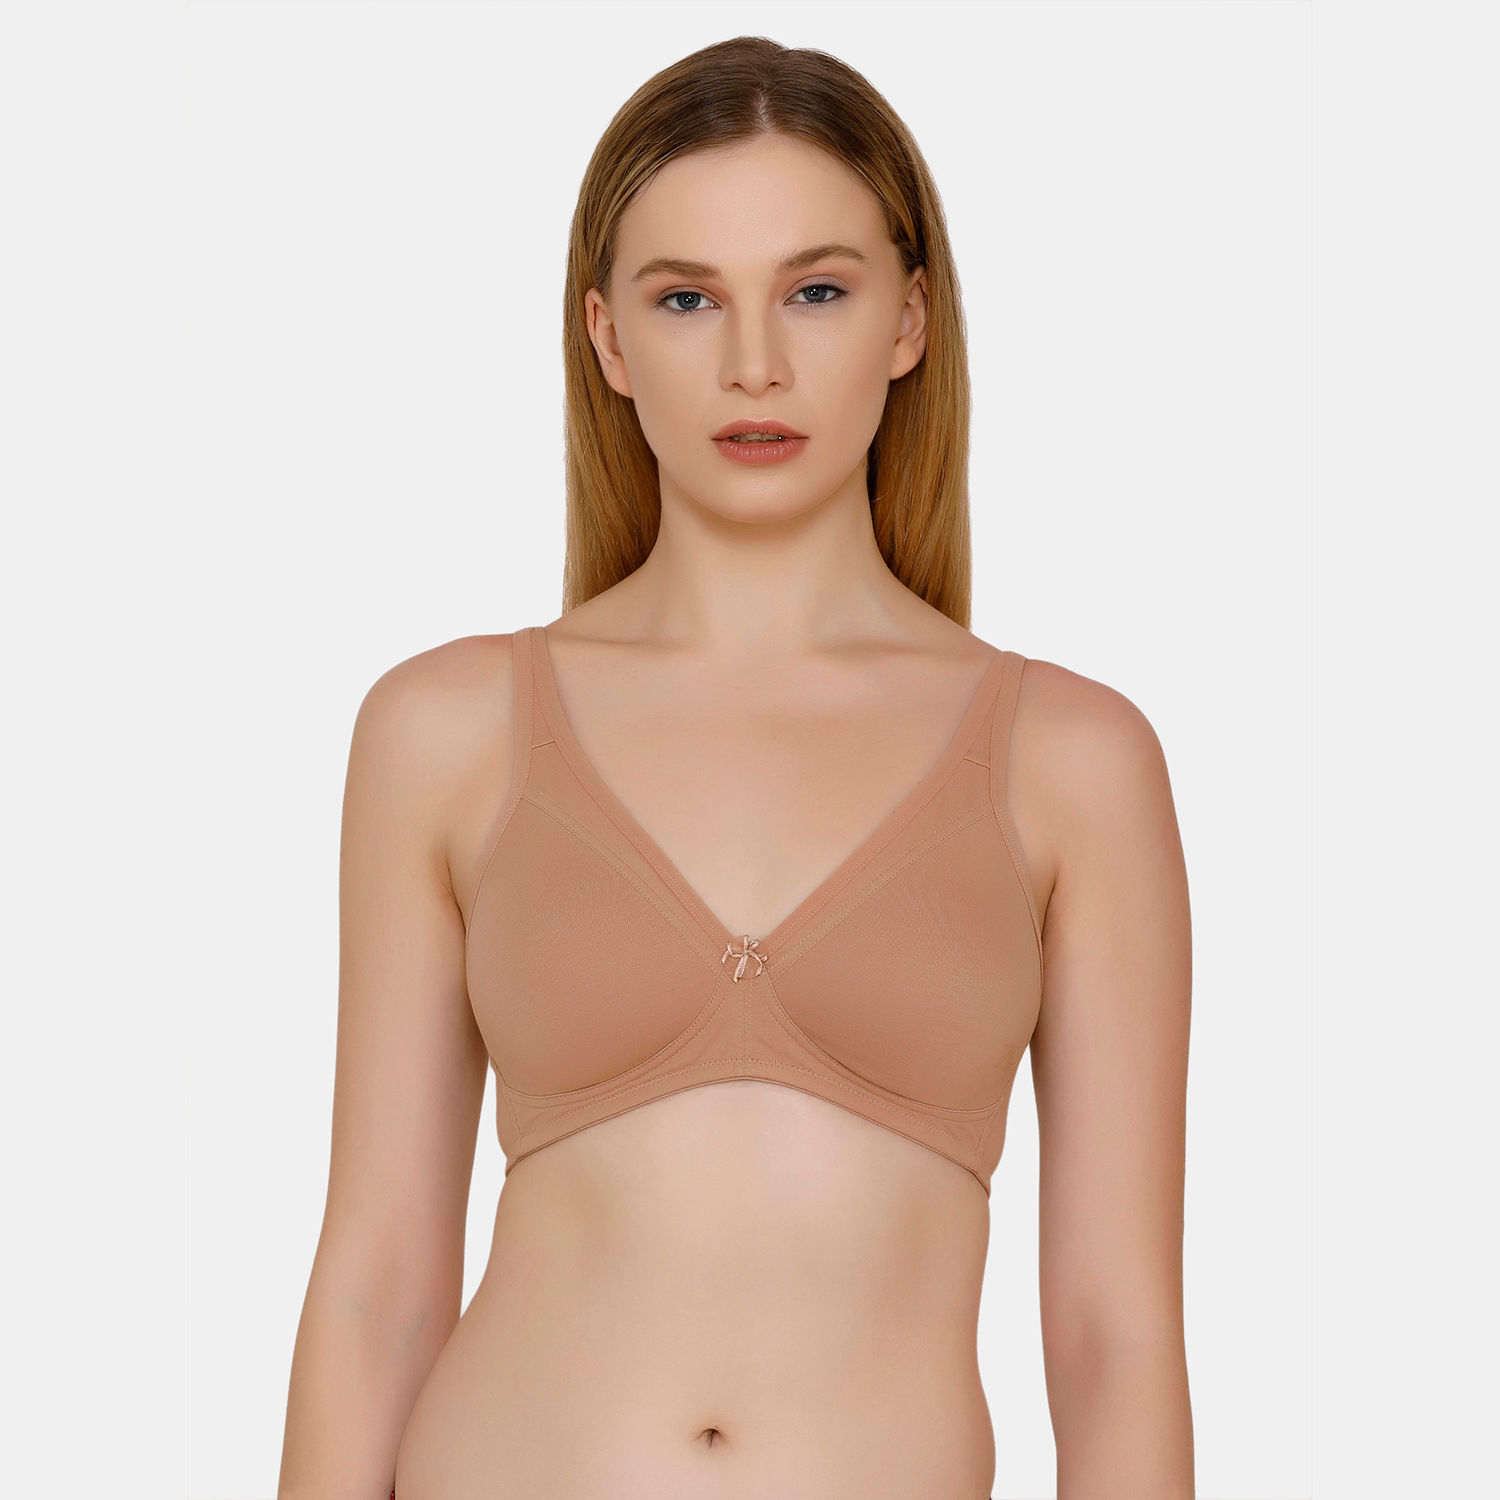 Zivame Non Padded Wirefree Cotton Mastectomy Bra With Insert Pocket - Skin:  Buy Zivame Non Padded Wirefree Cotton Mastectomy Bra With Insert Pocket -  Skin Online at Best Price in India